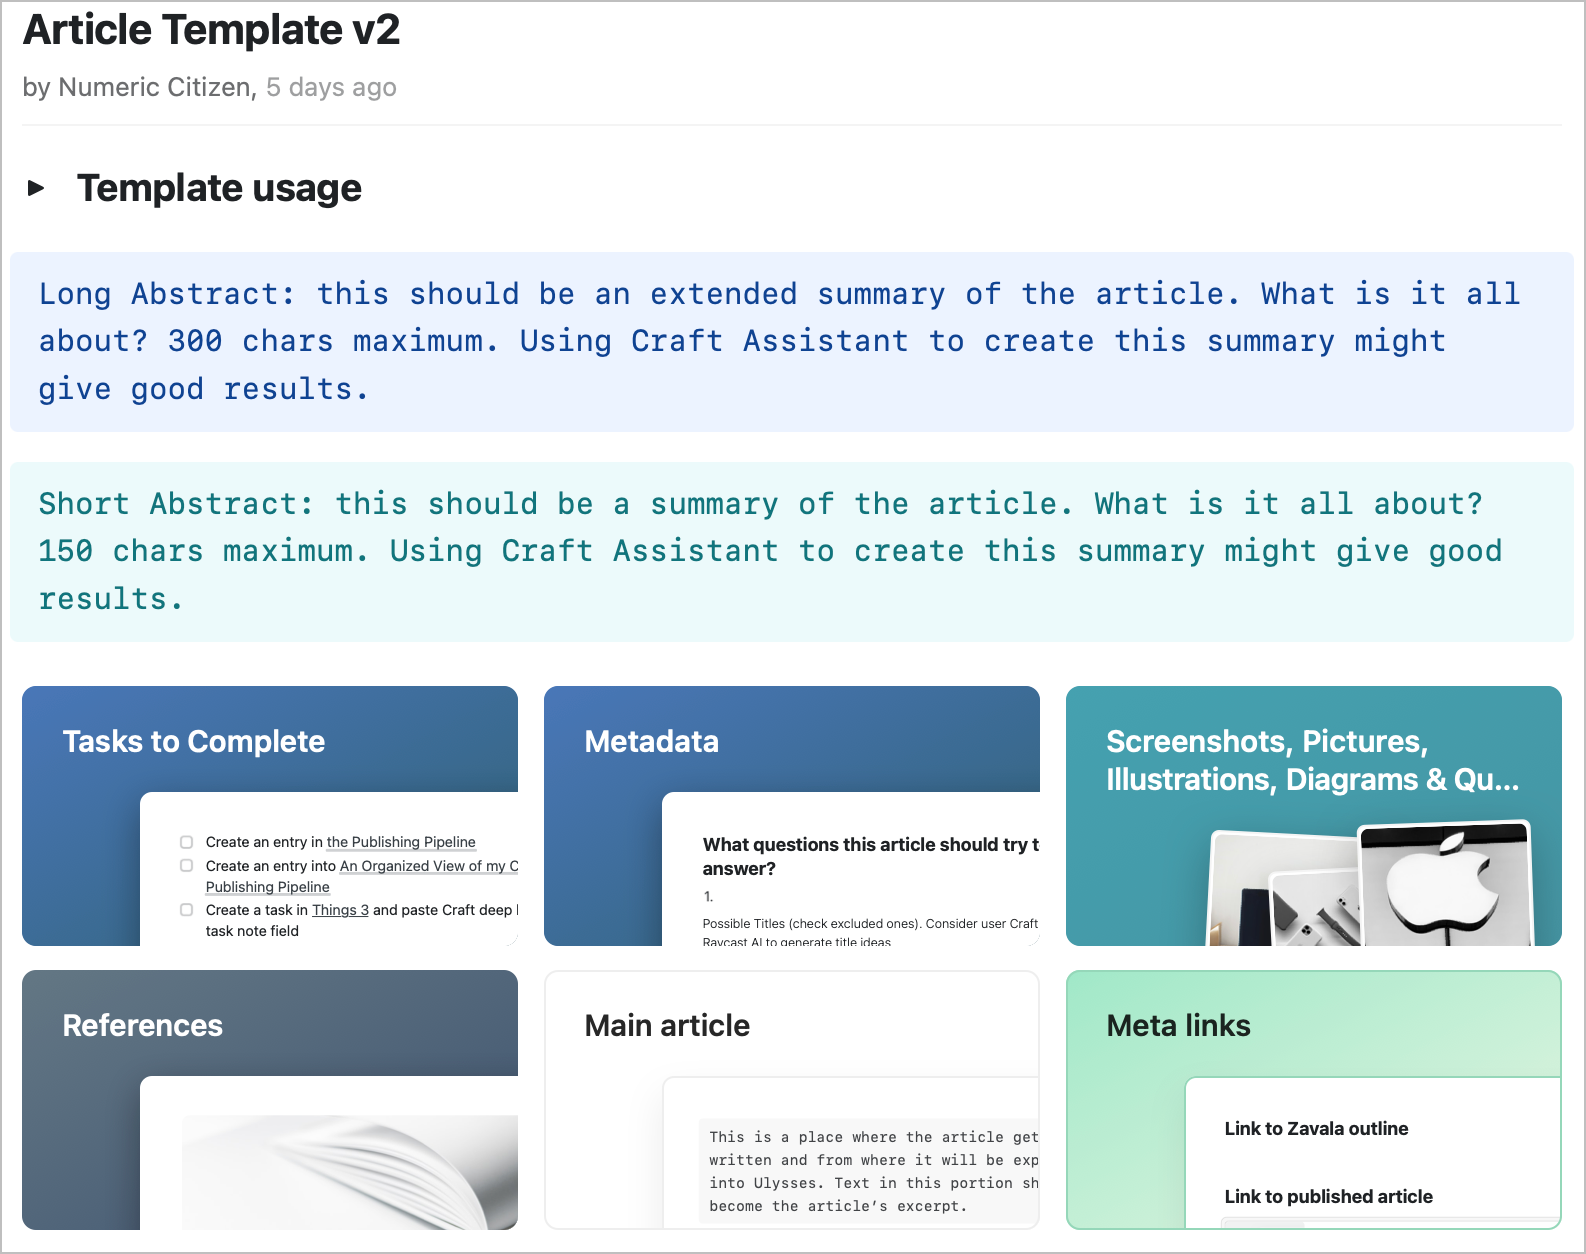 The top-level view of my article template built using Craft.